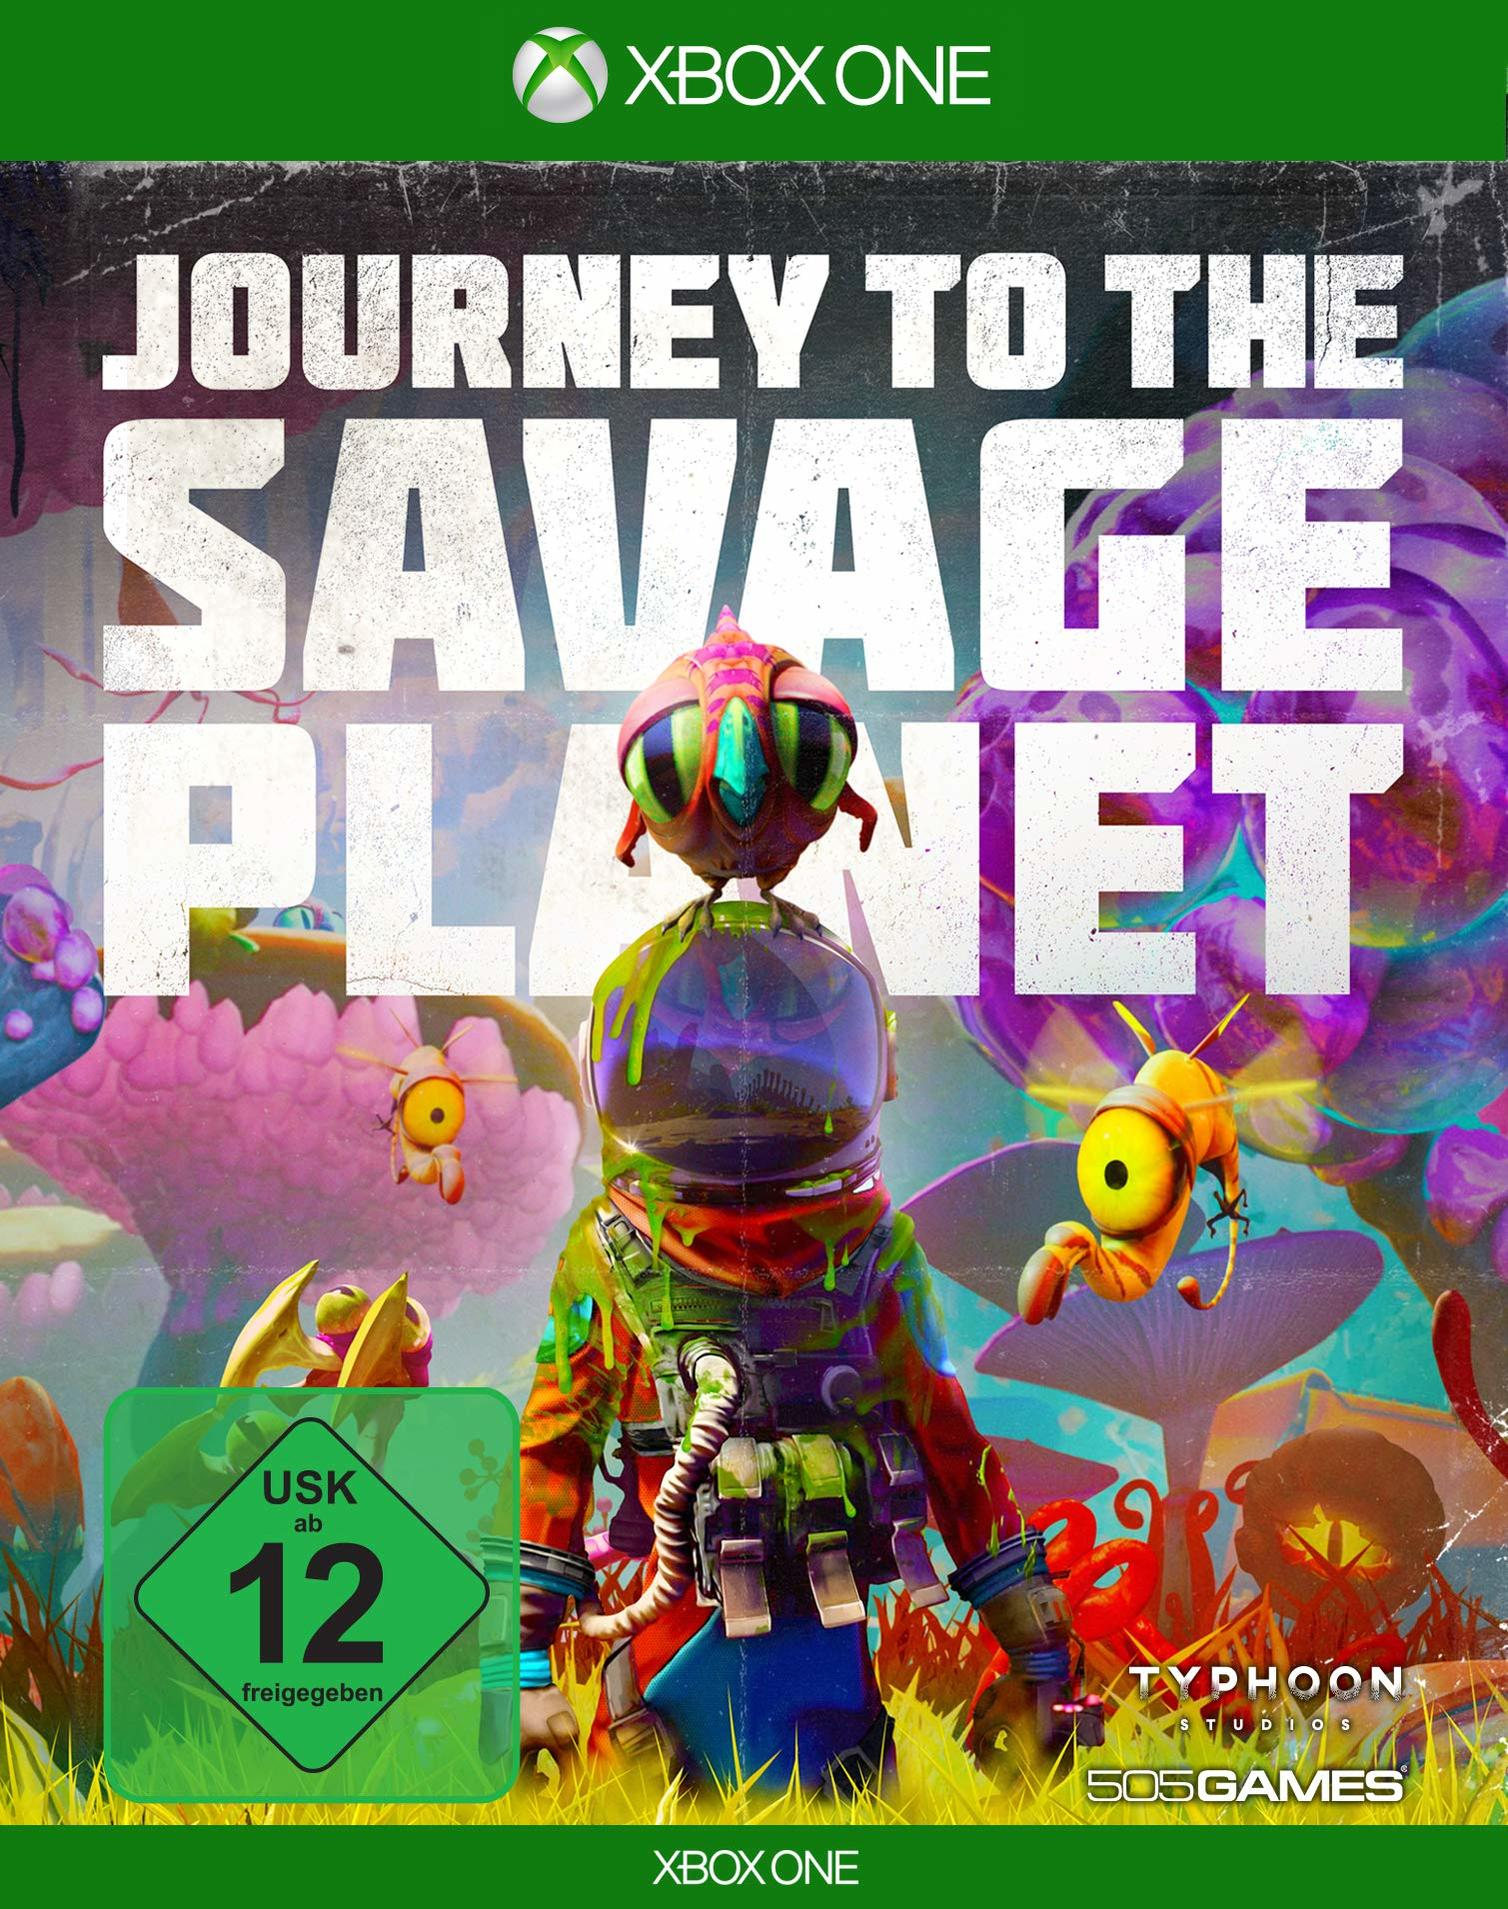 XBO JOURNEY TO One] - SAVAGE PLANET THE [Xbox